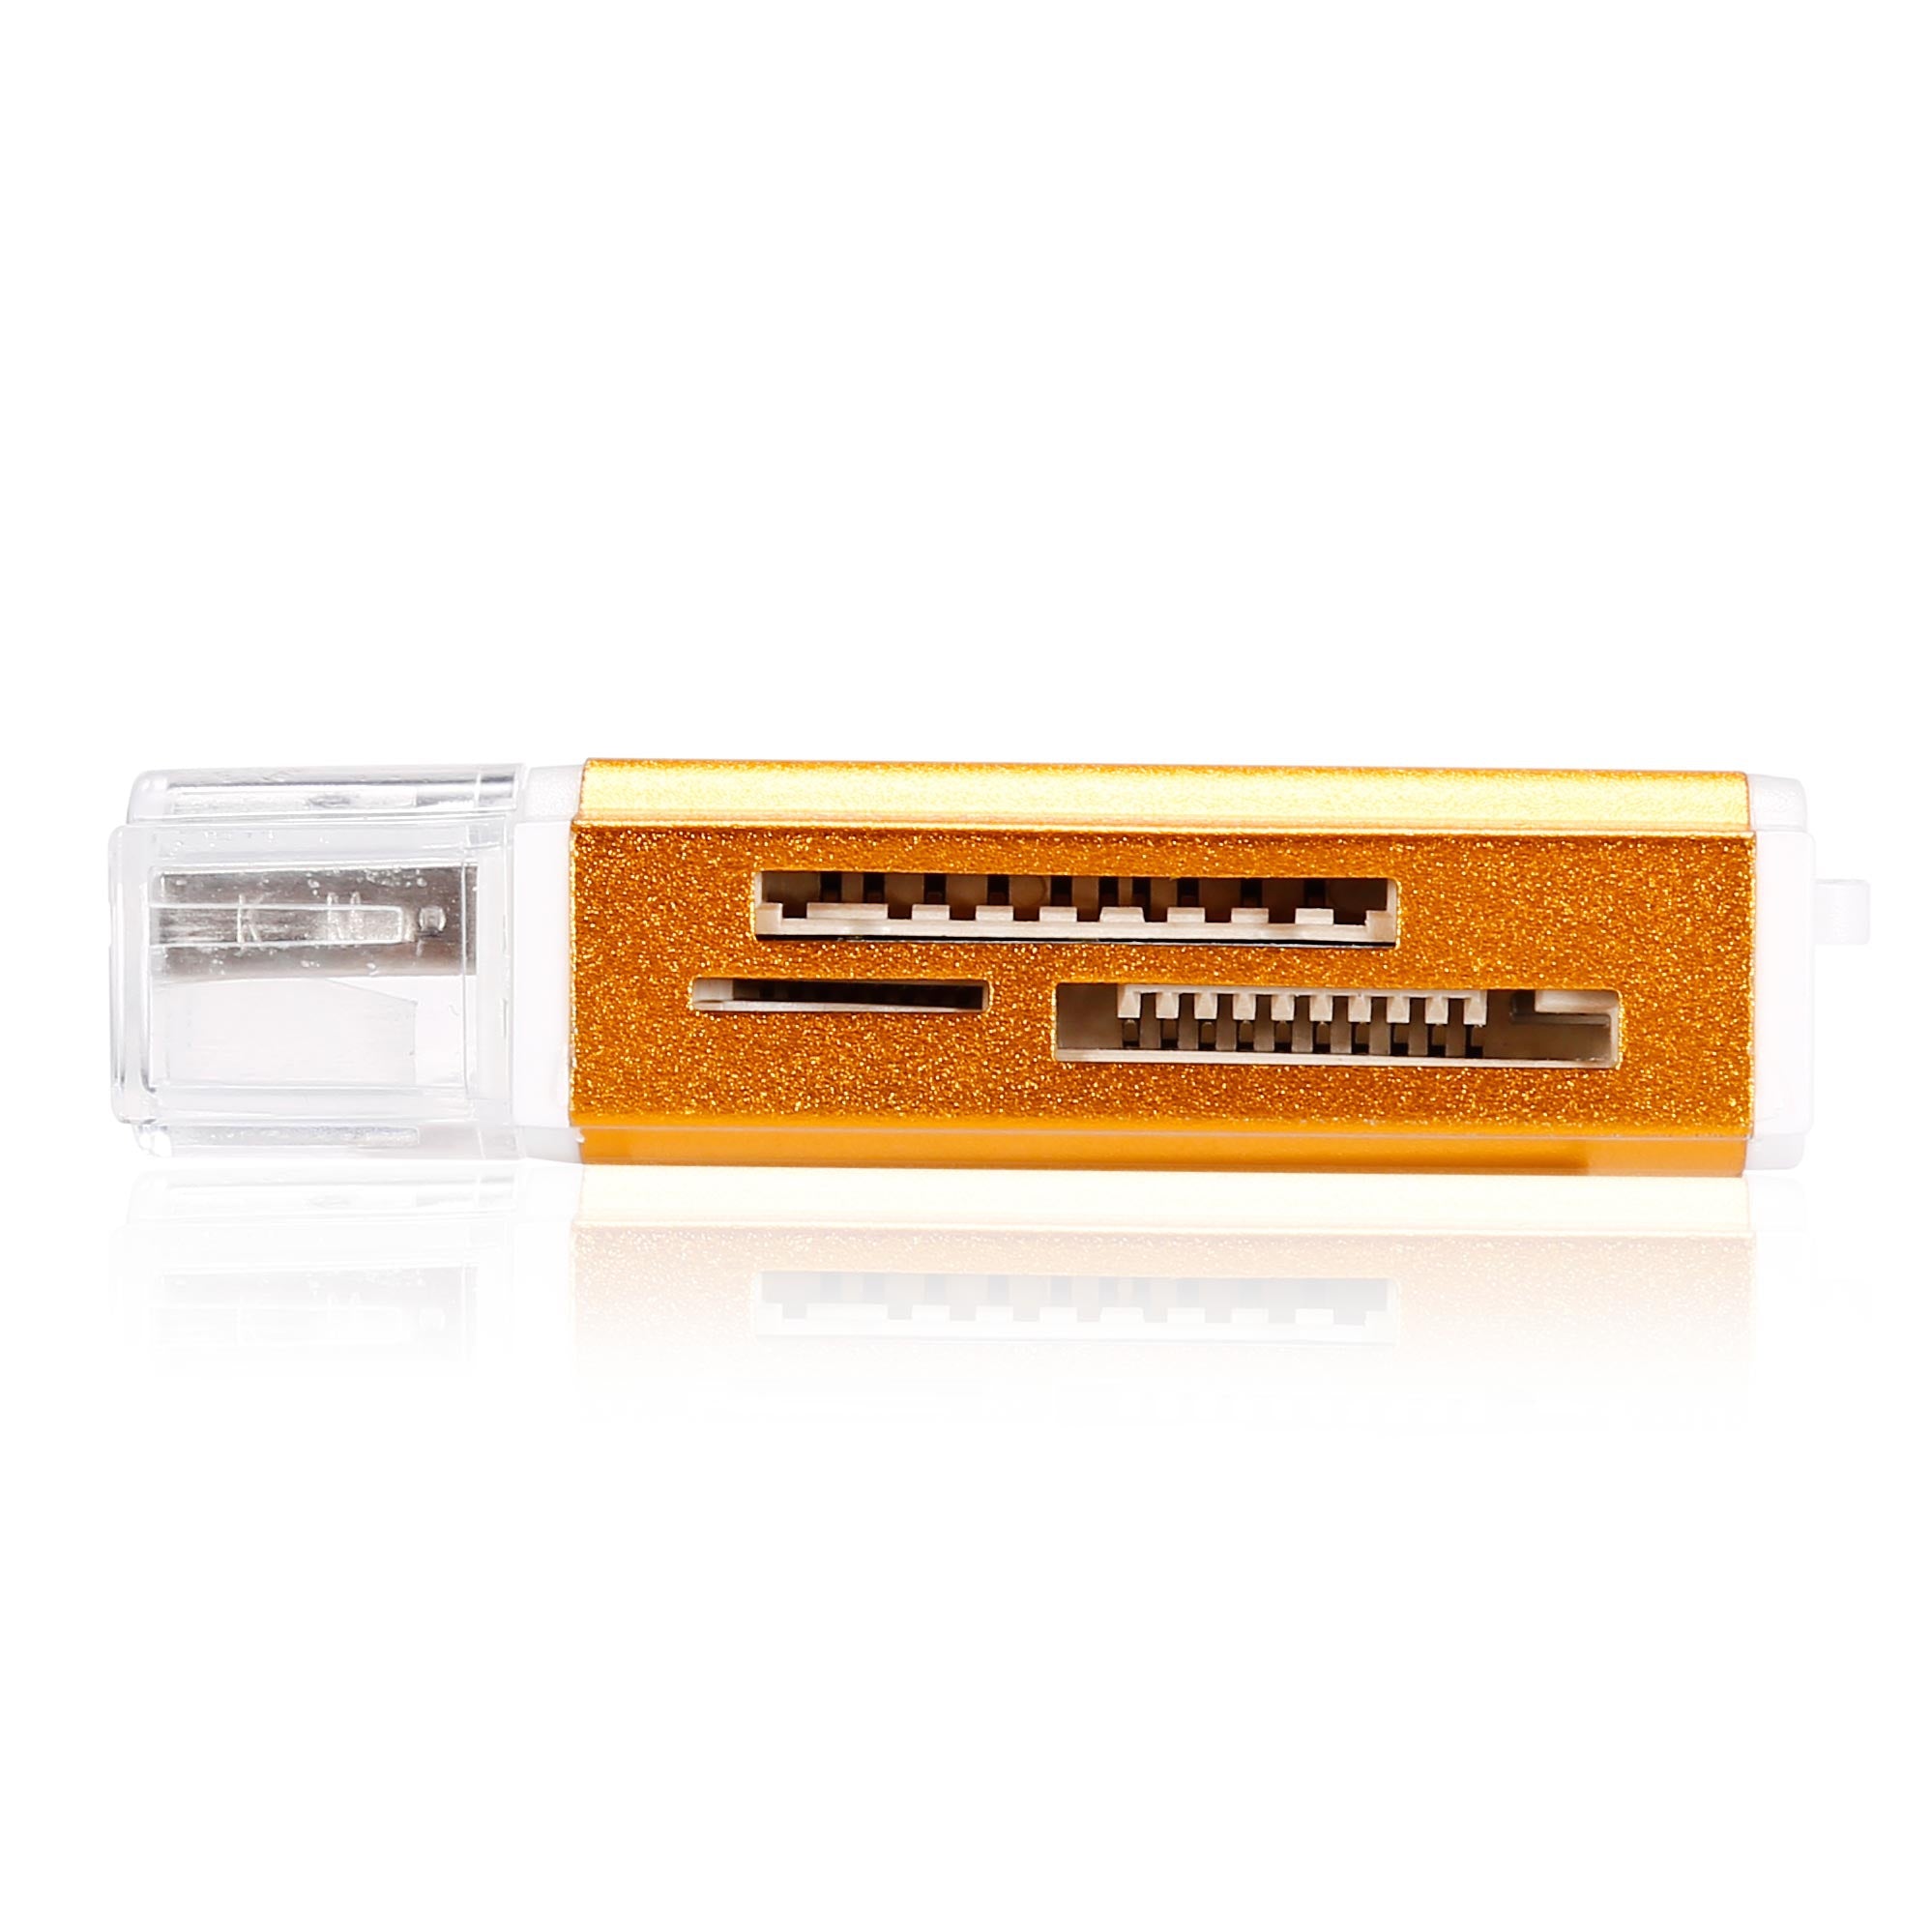 4 in 1 USB 2.0 Card Reader with TF / SD Card Slot